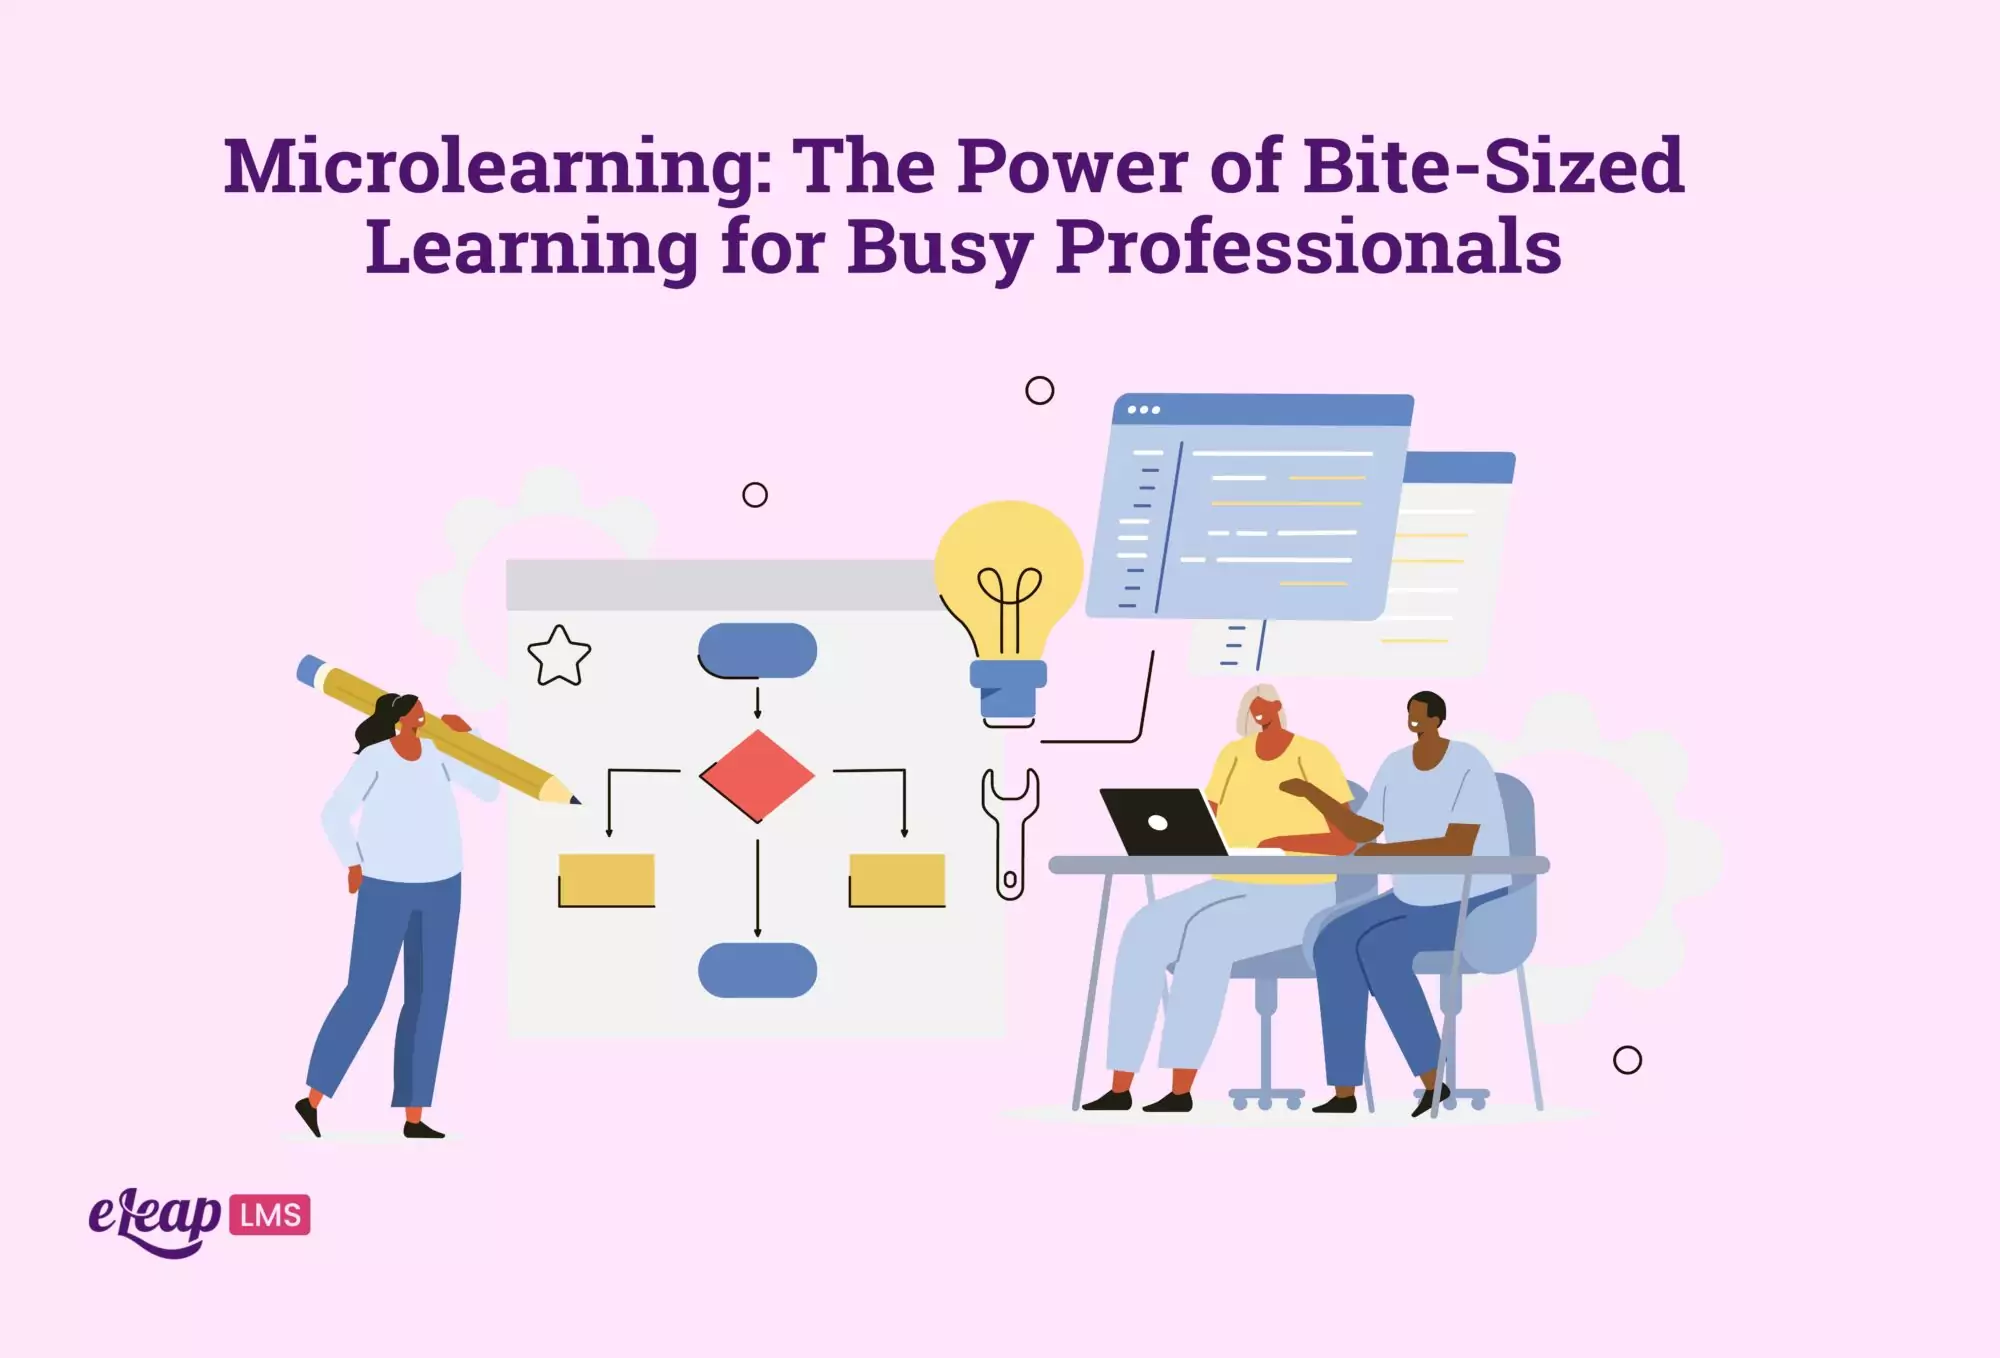 Microlearning: The Power of Bite-Sized Learning for Busy Professionals